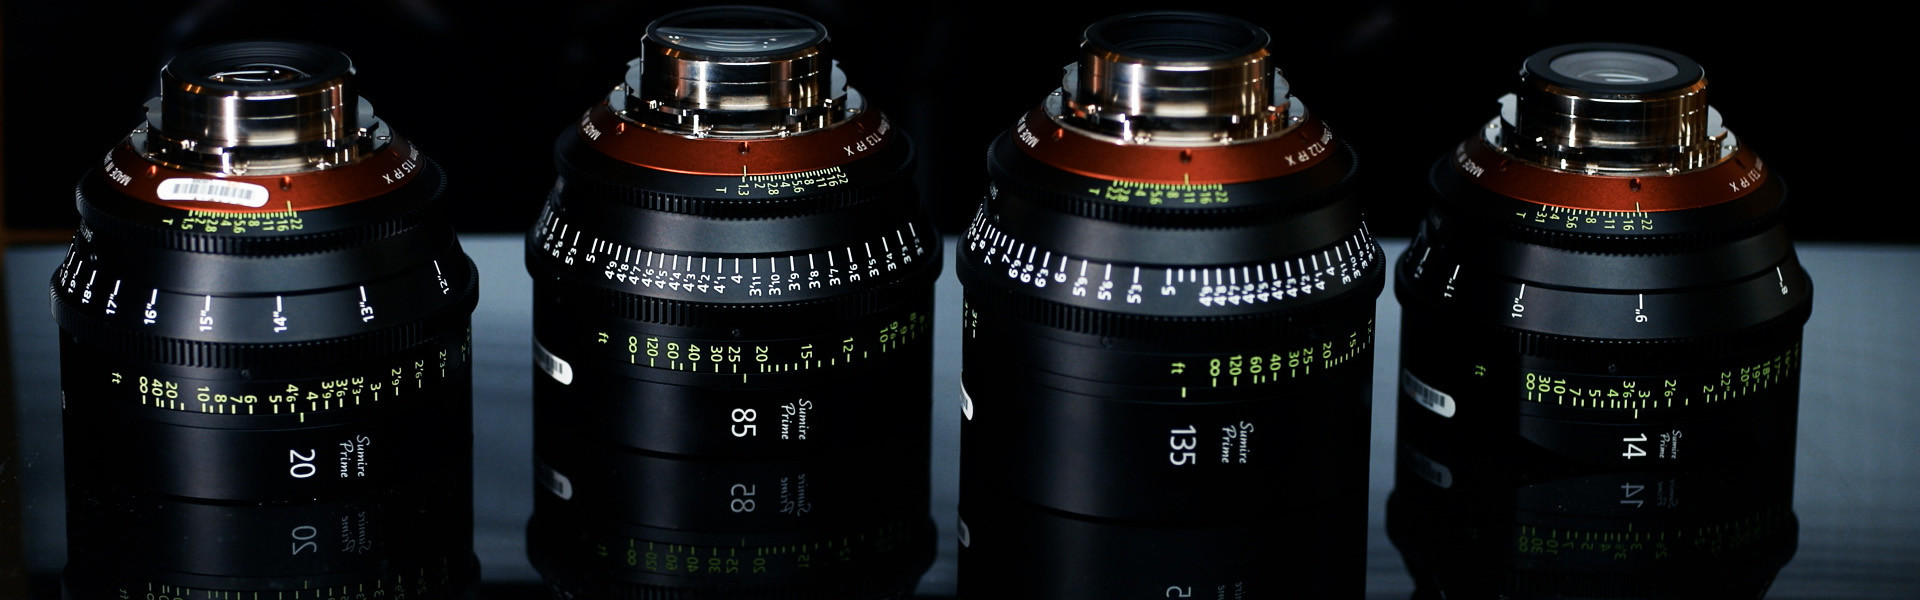 Header image for article A Practical Look at the Canon Sumire Primes